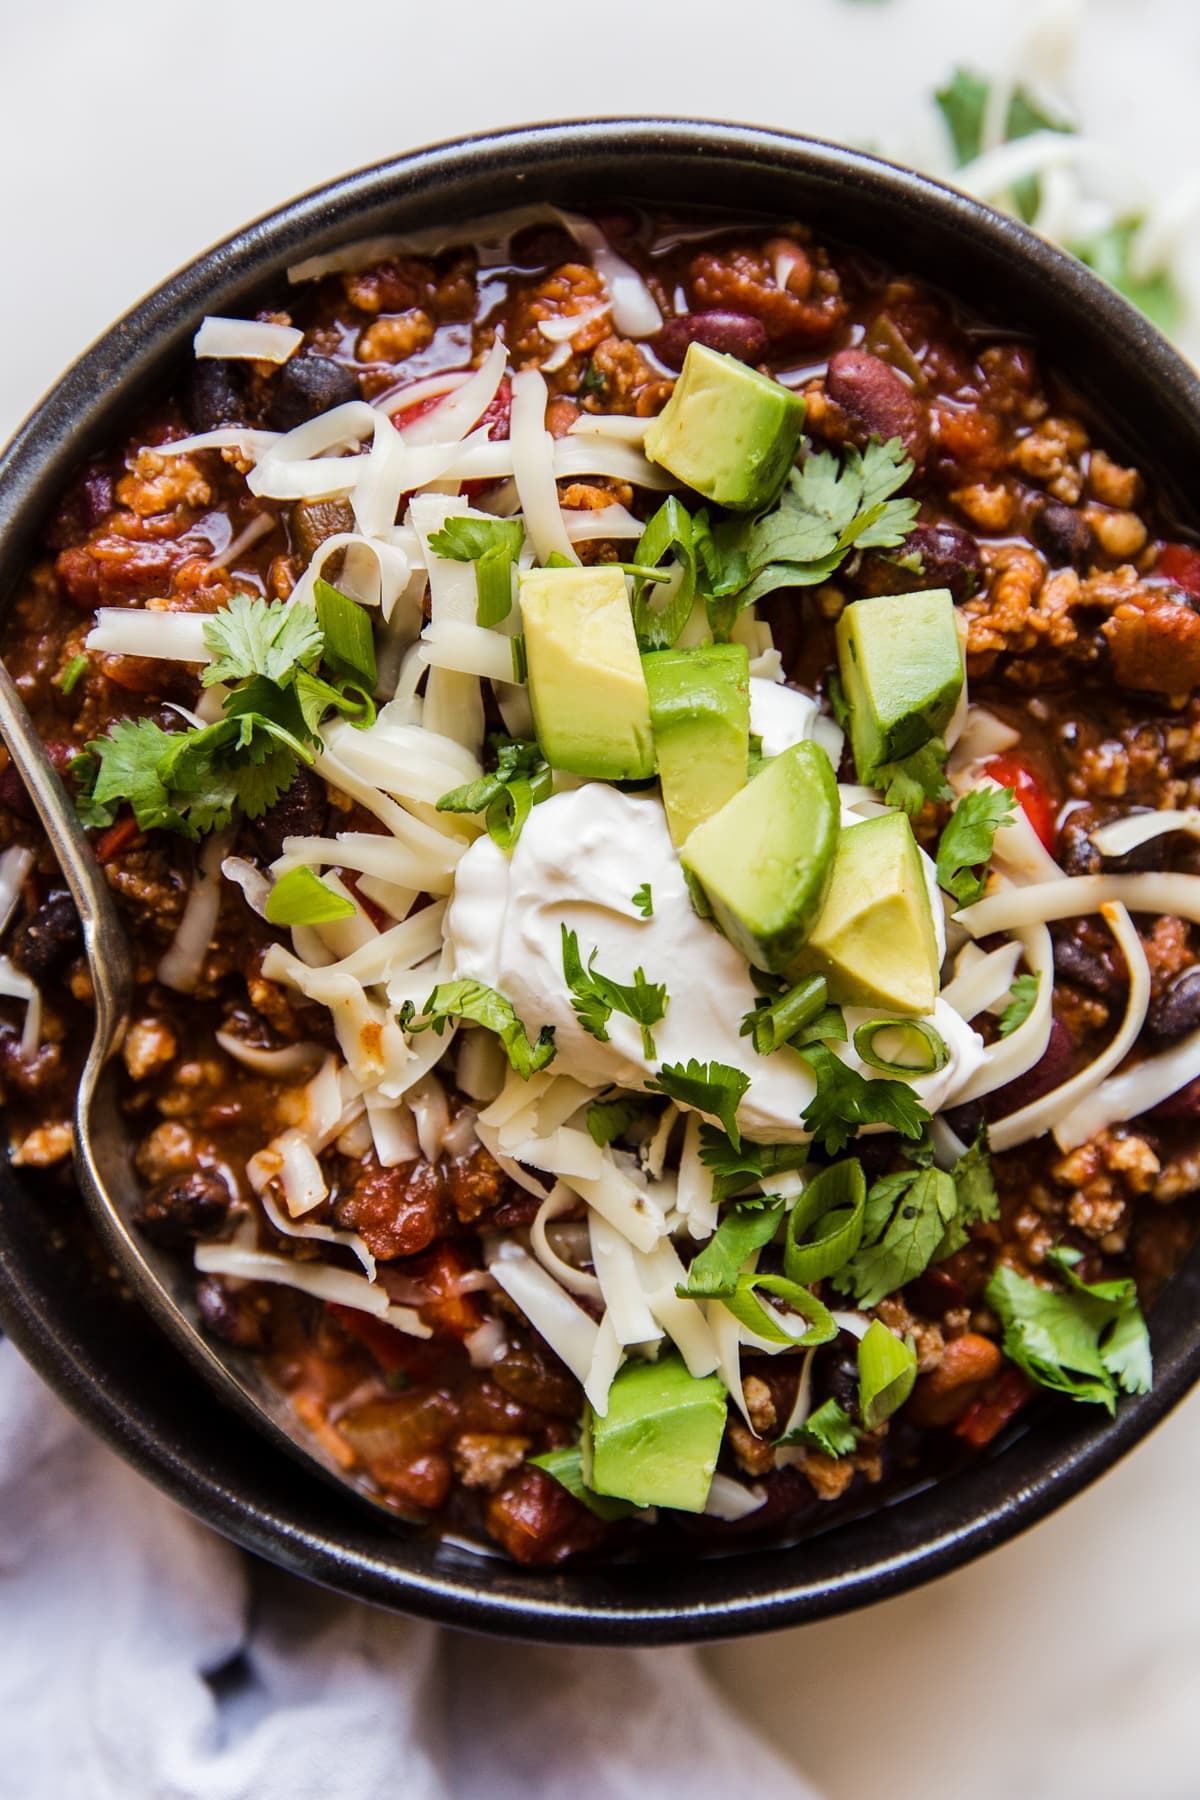 Award winning chili in a bowl with avocado and 3 beans